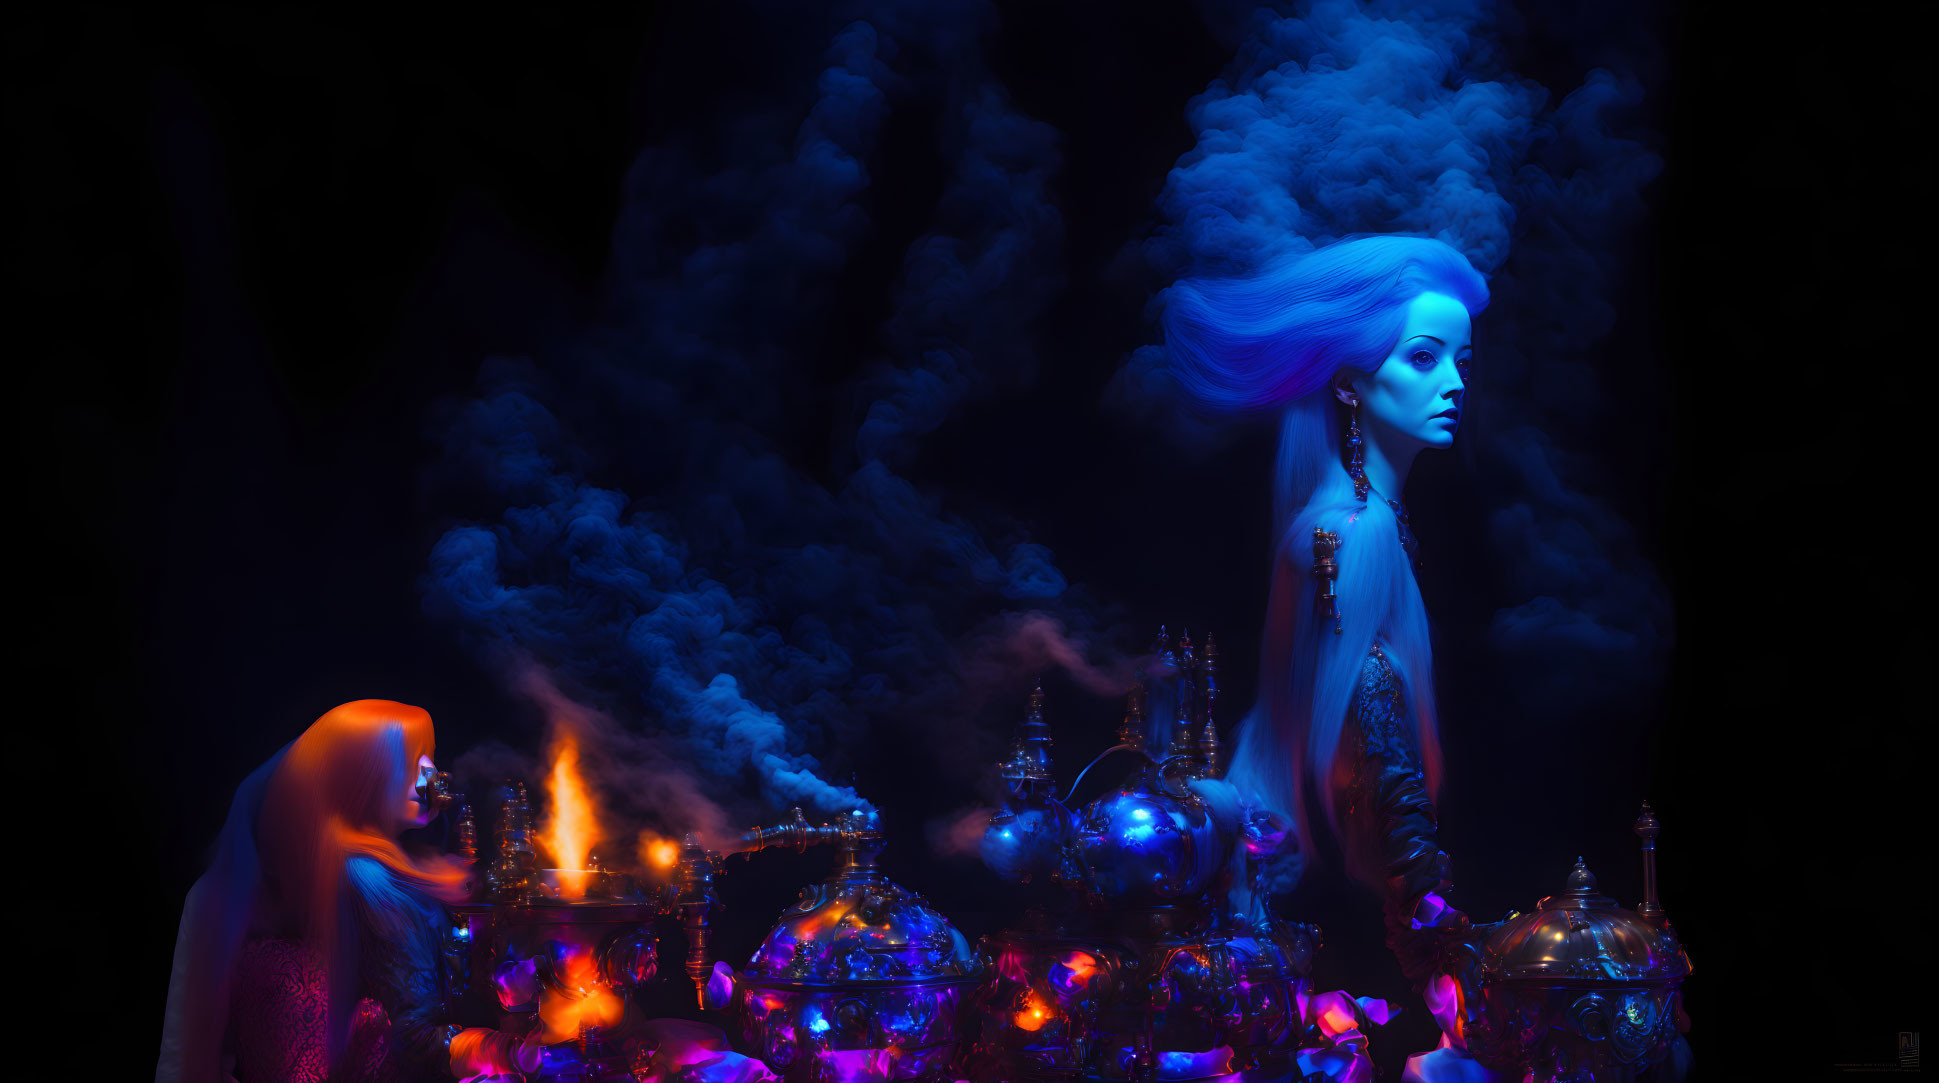 Pale woman with blue hair in mystical setting with glowing vessels